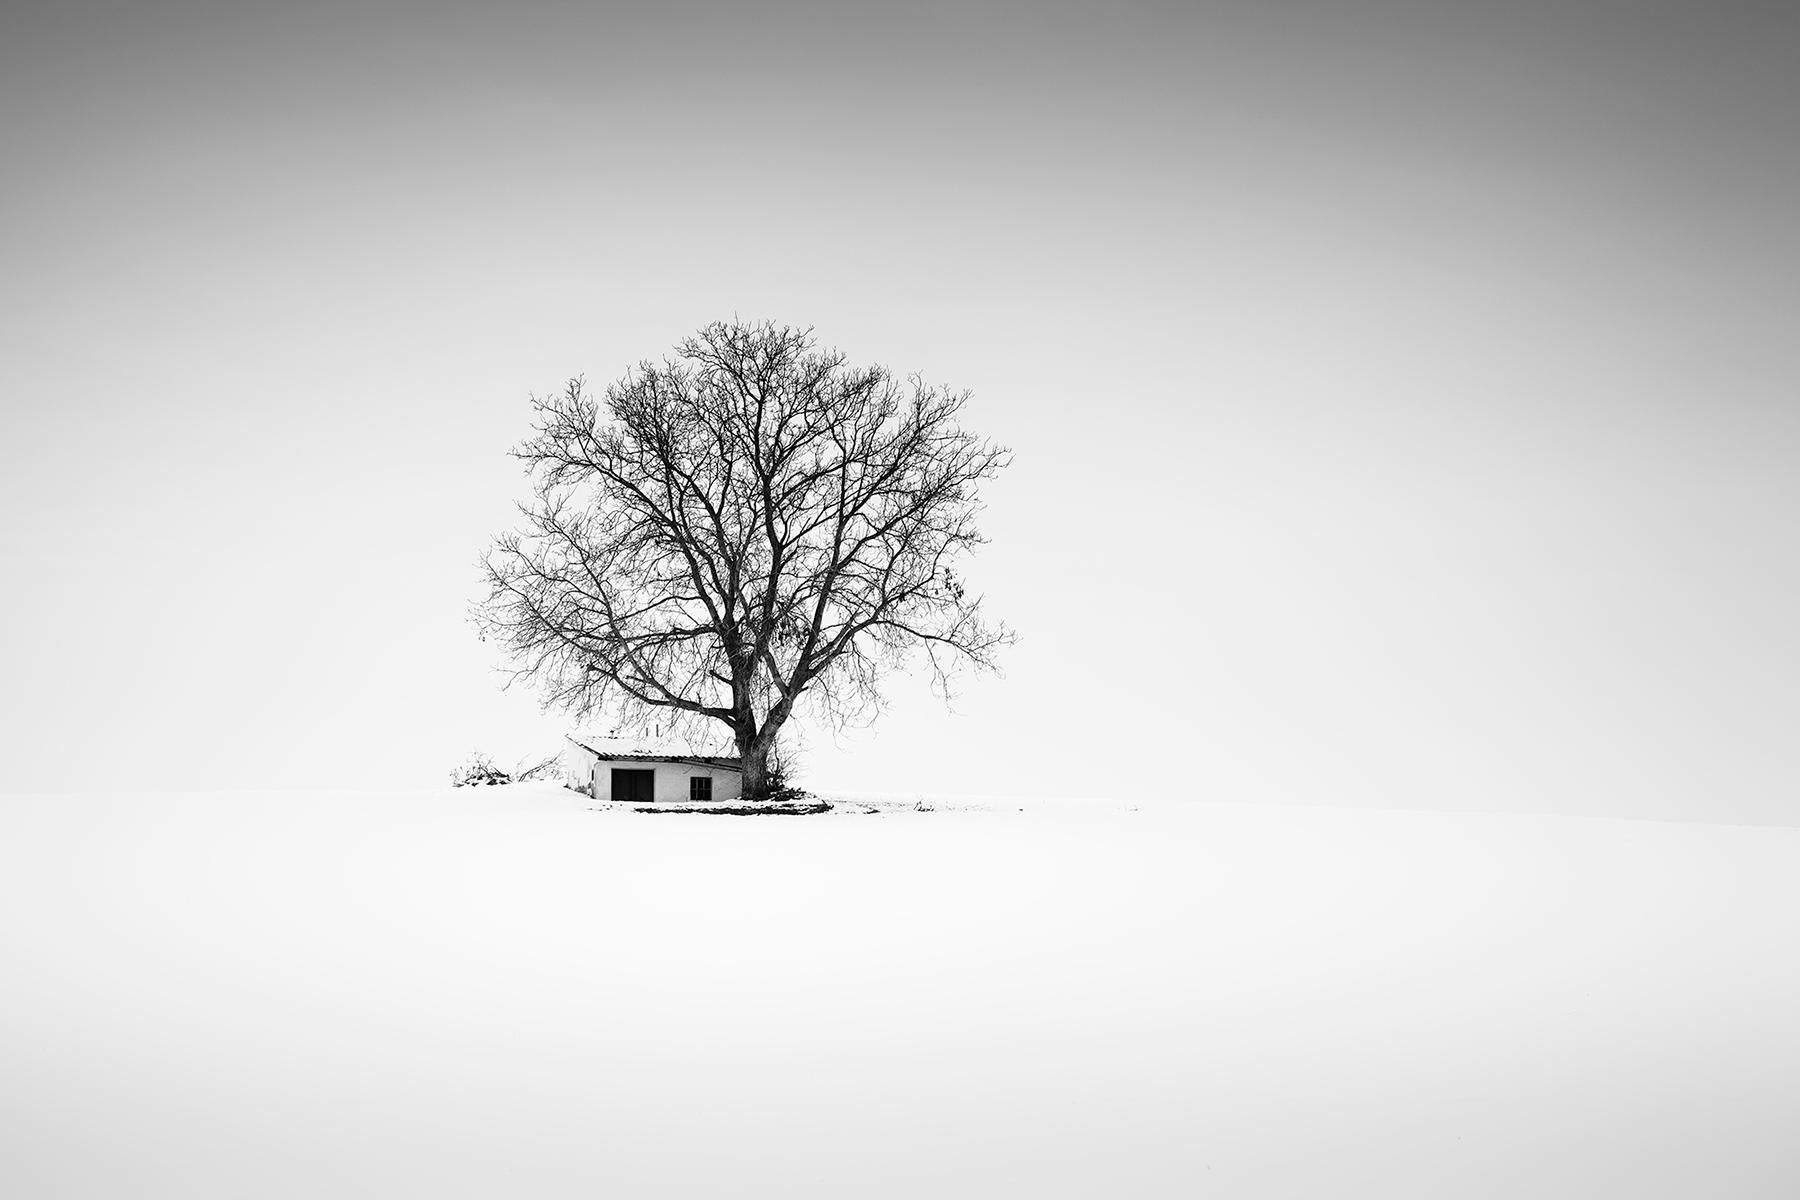 Gerald Berghammer Landscape Photograph - Wine Press House, Austria, Black and white photography panorama winter landscape